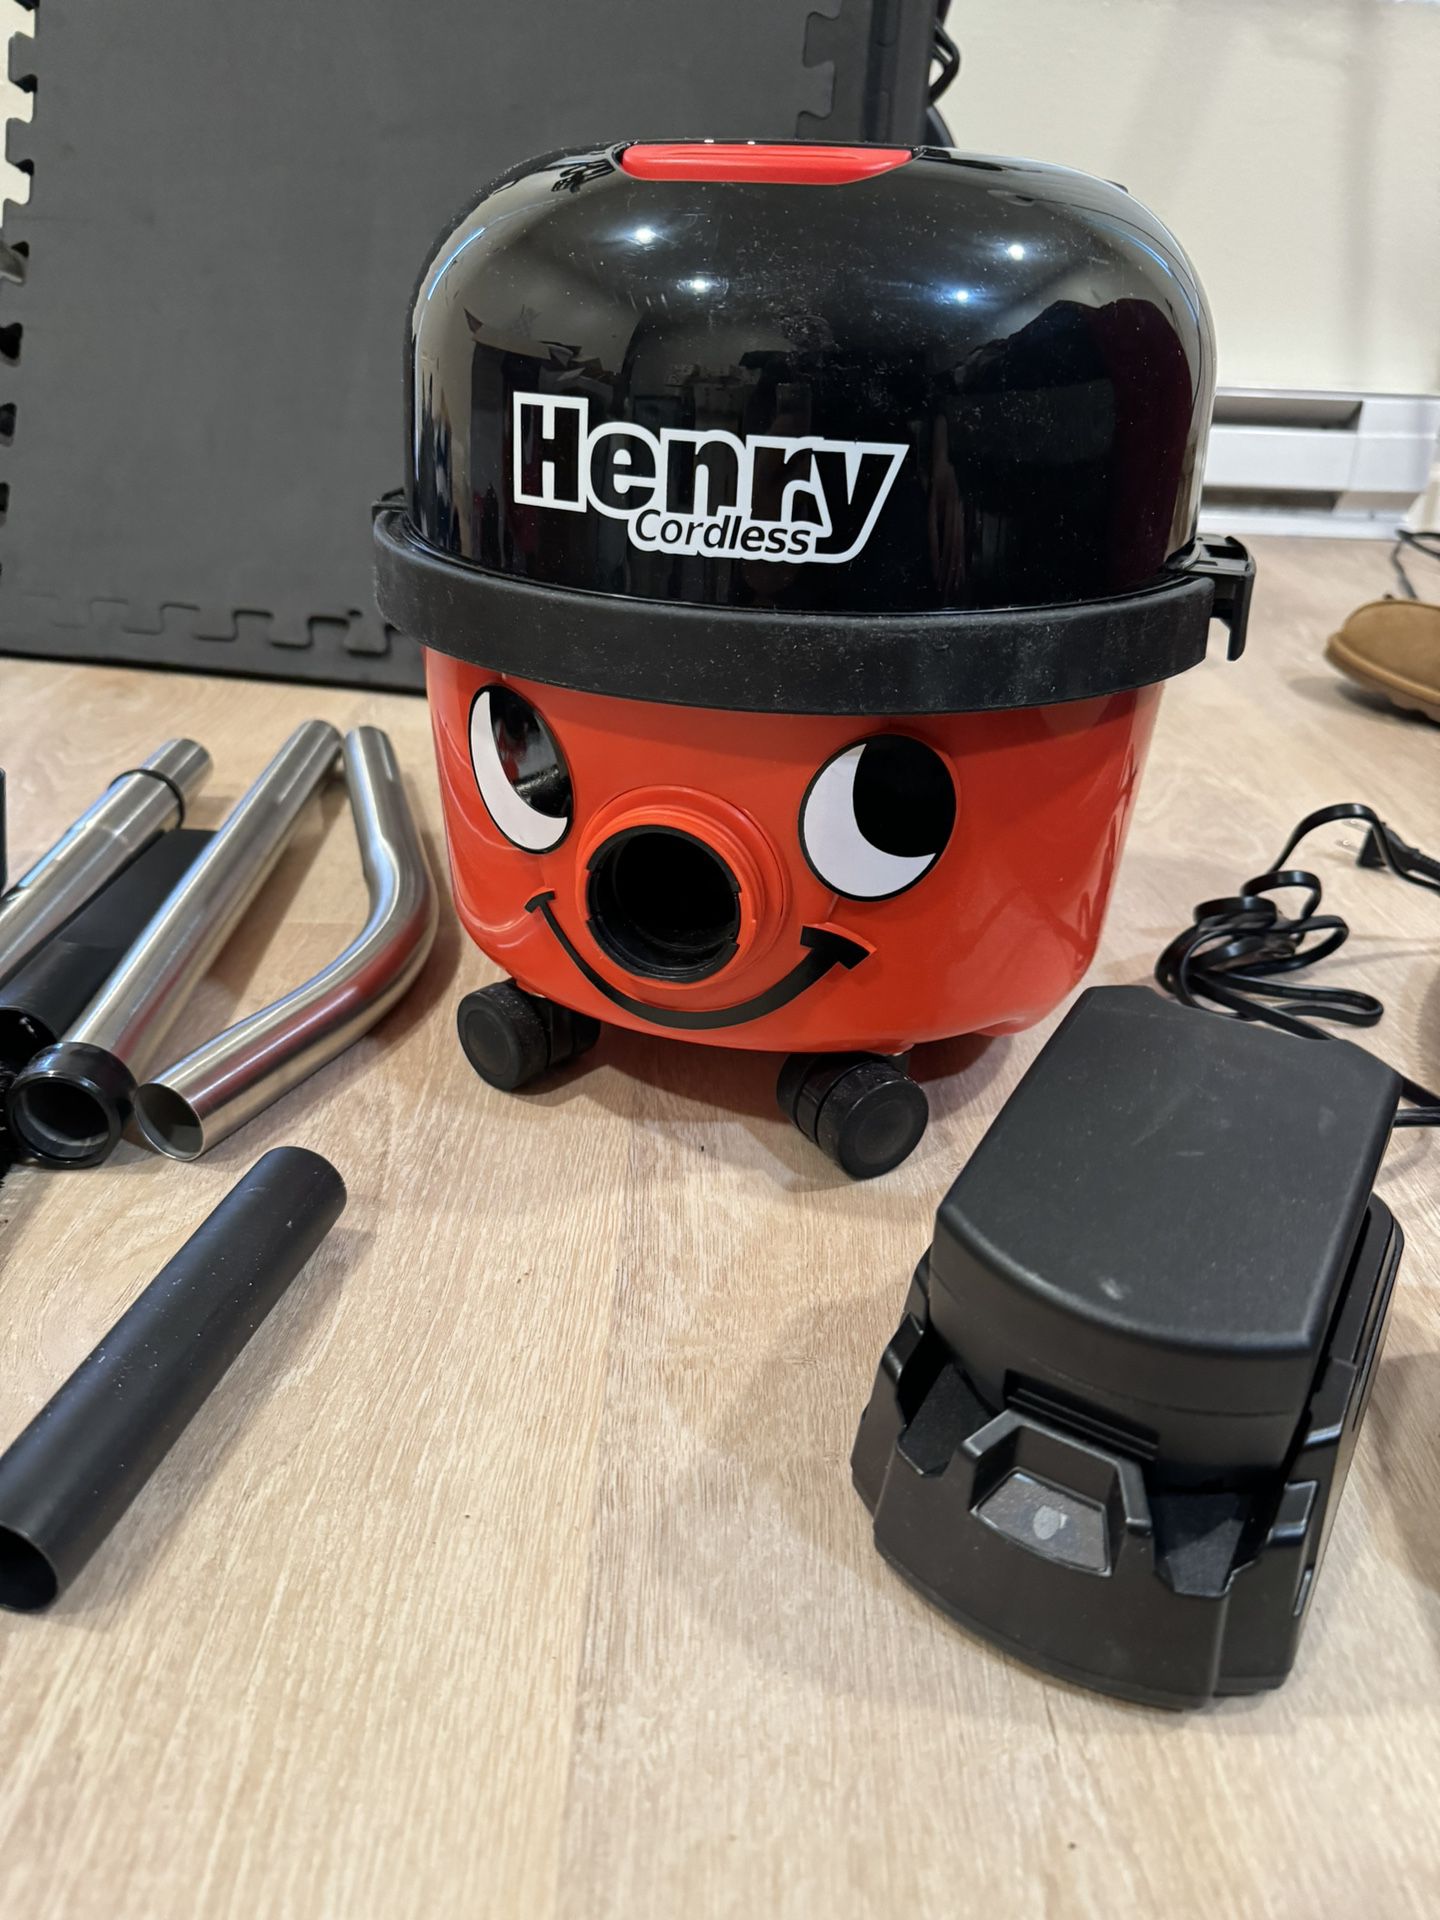 Cordless Henry Canister Vacuum